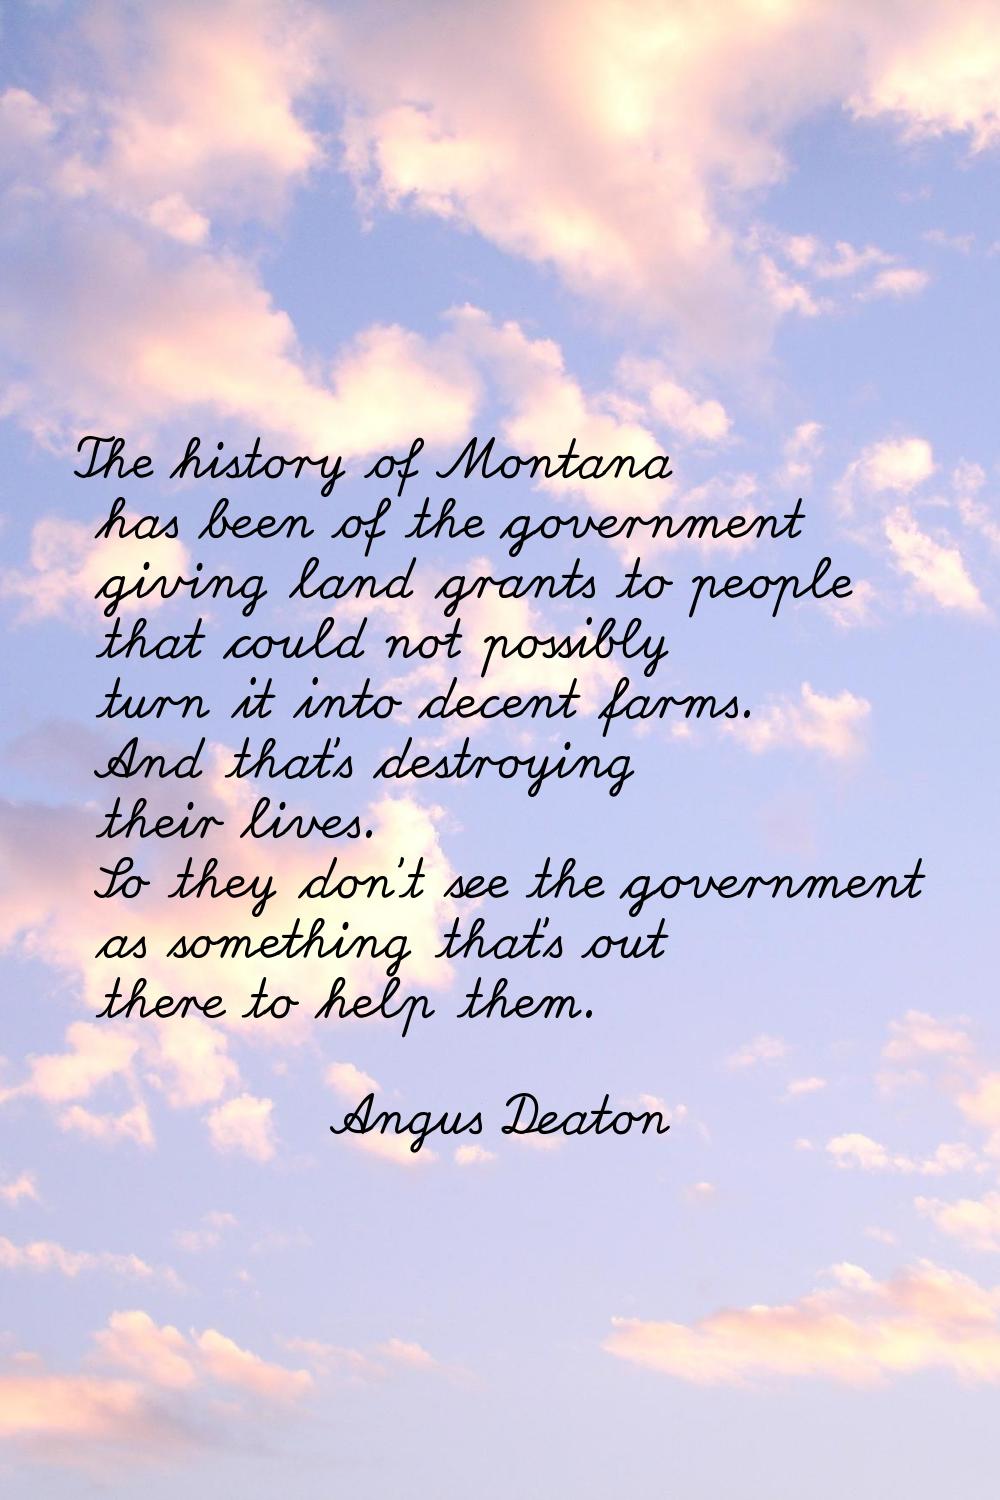 The history of Montana has been of the government giving land grants to people that could not possi